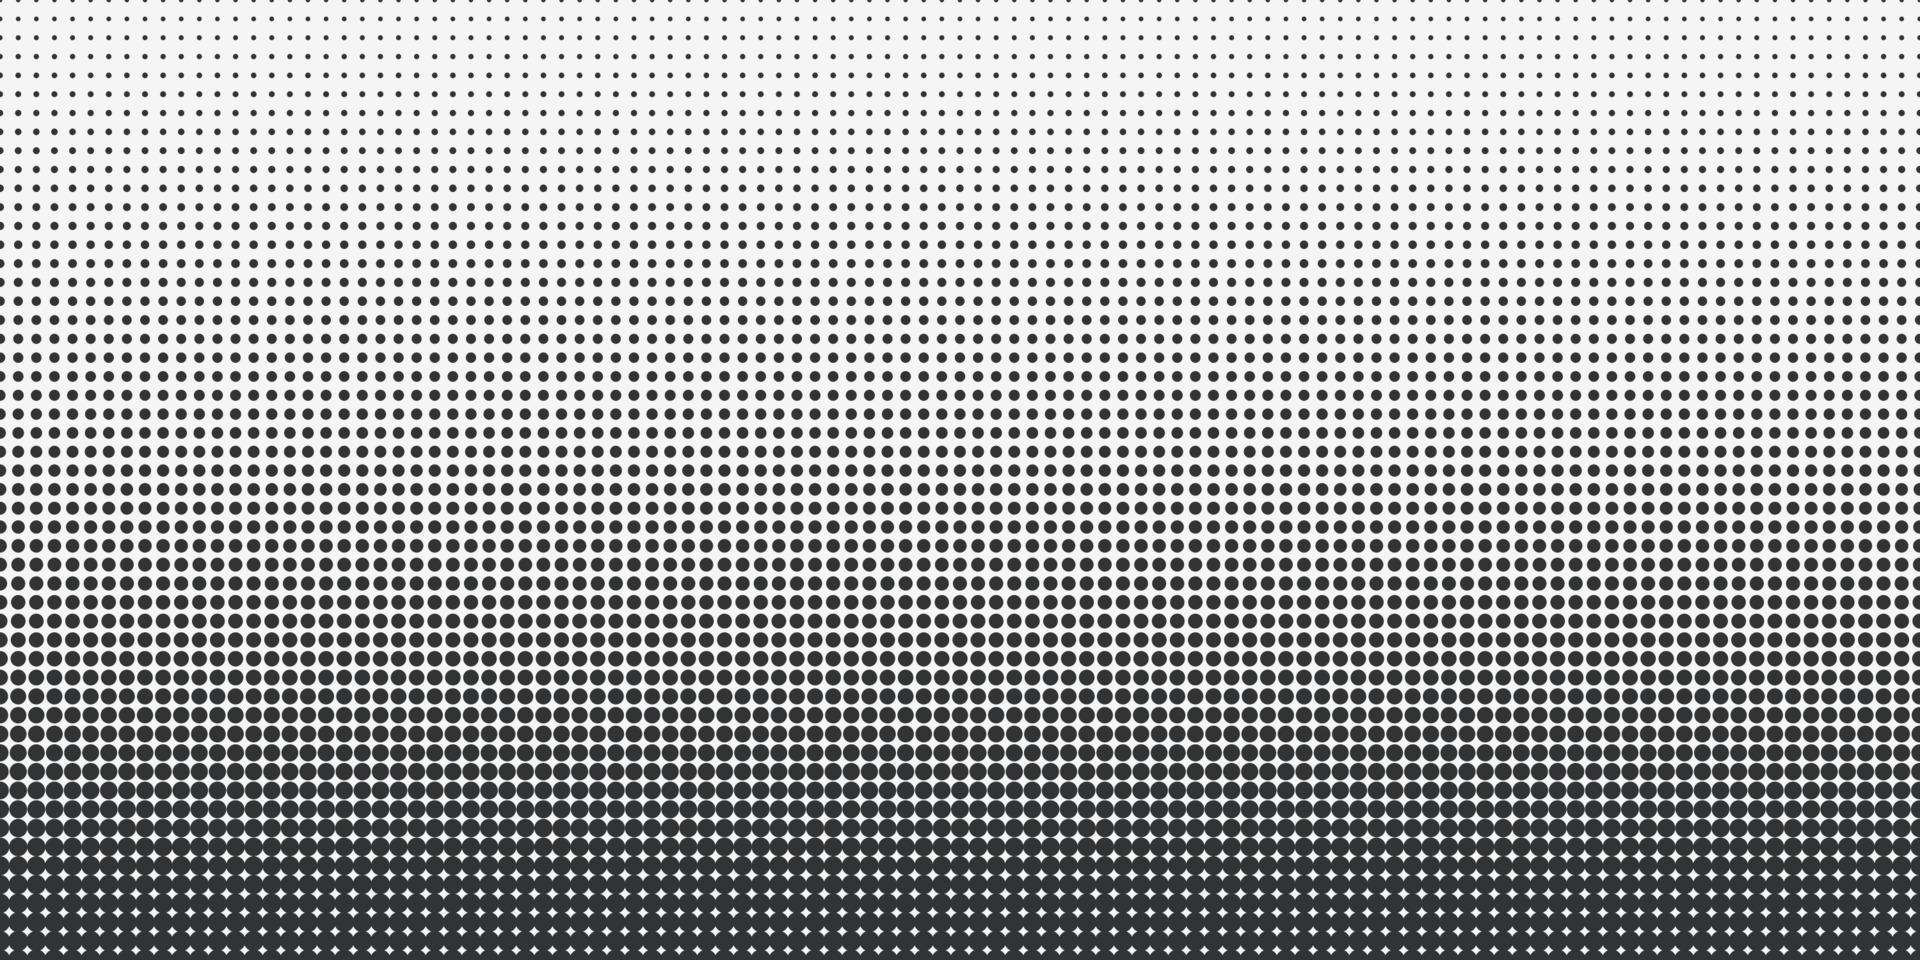 Black metallic color small dots halftone pattern on white background. vector